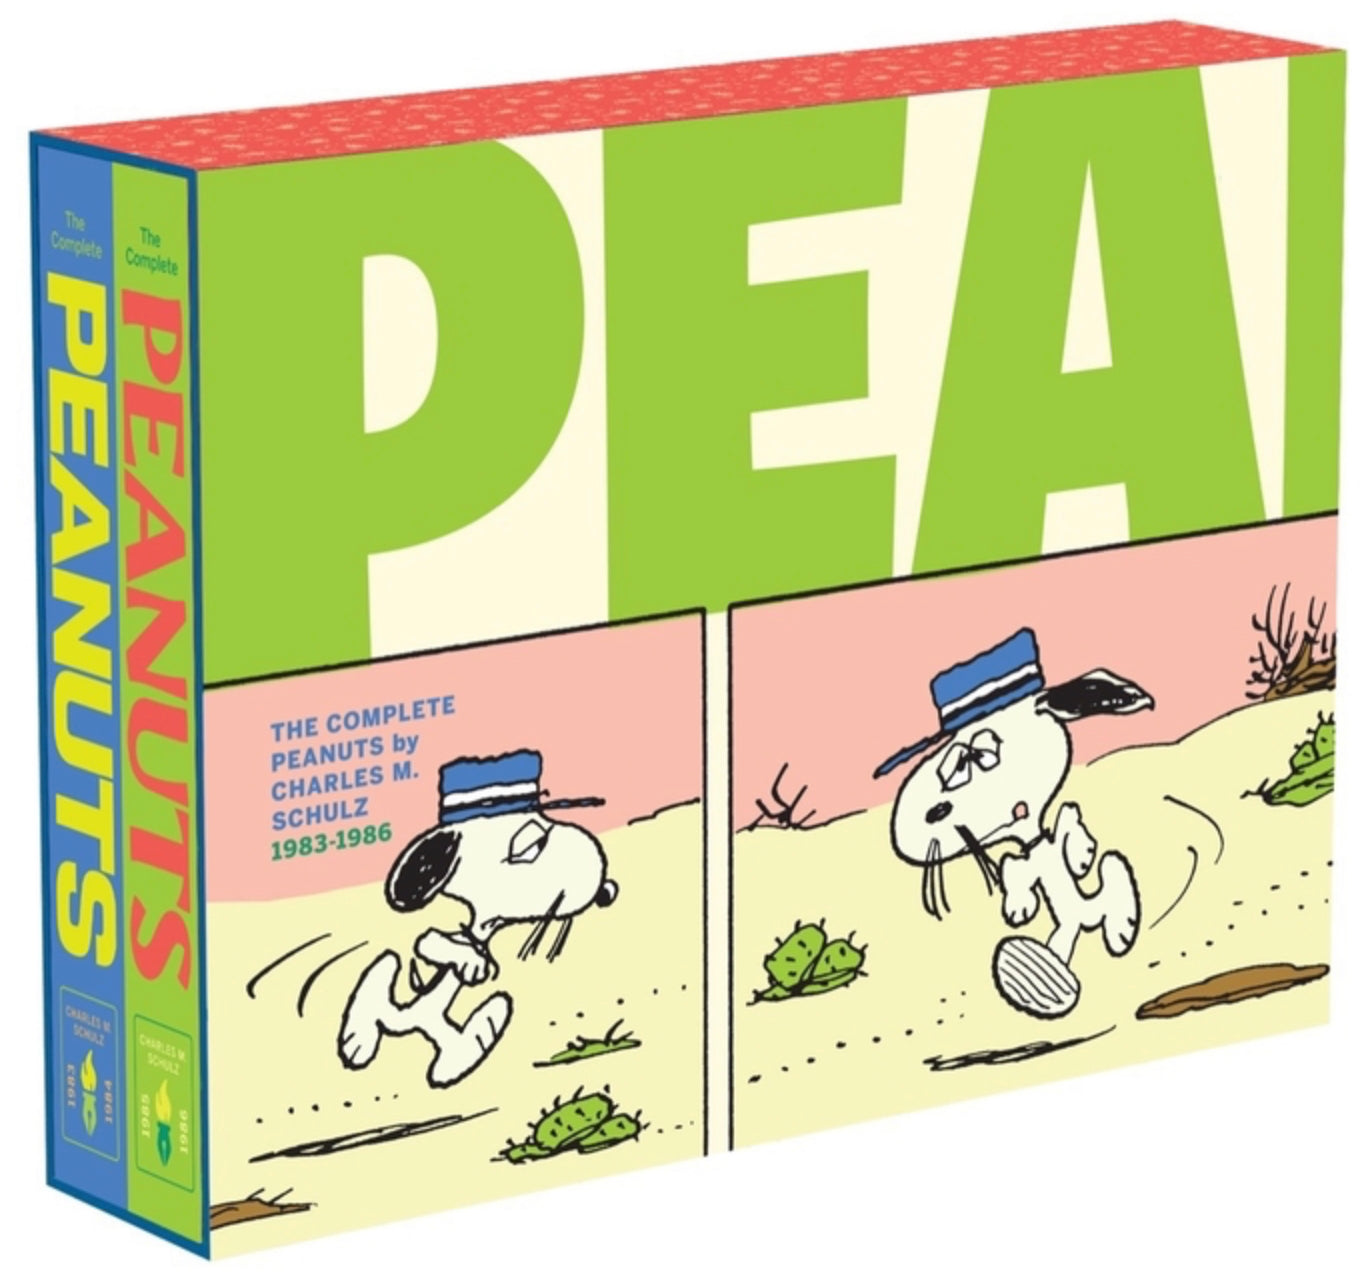 The Complete Peanuts 1983-1986: Vols. 17 & 18 (Gift Box Set), Charles M. Schulz